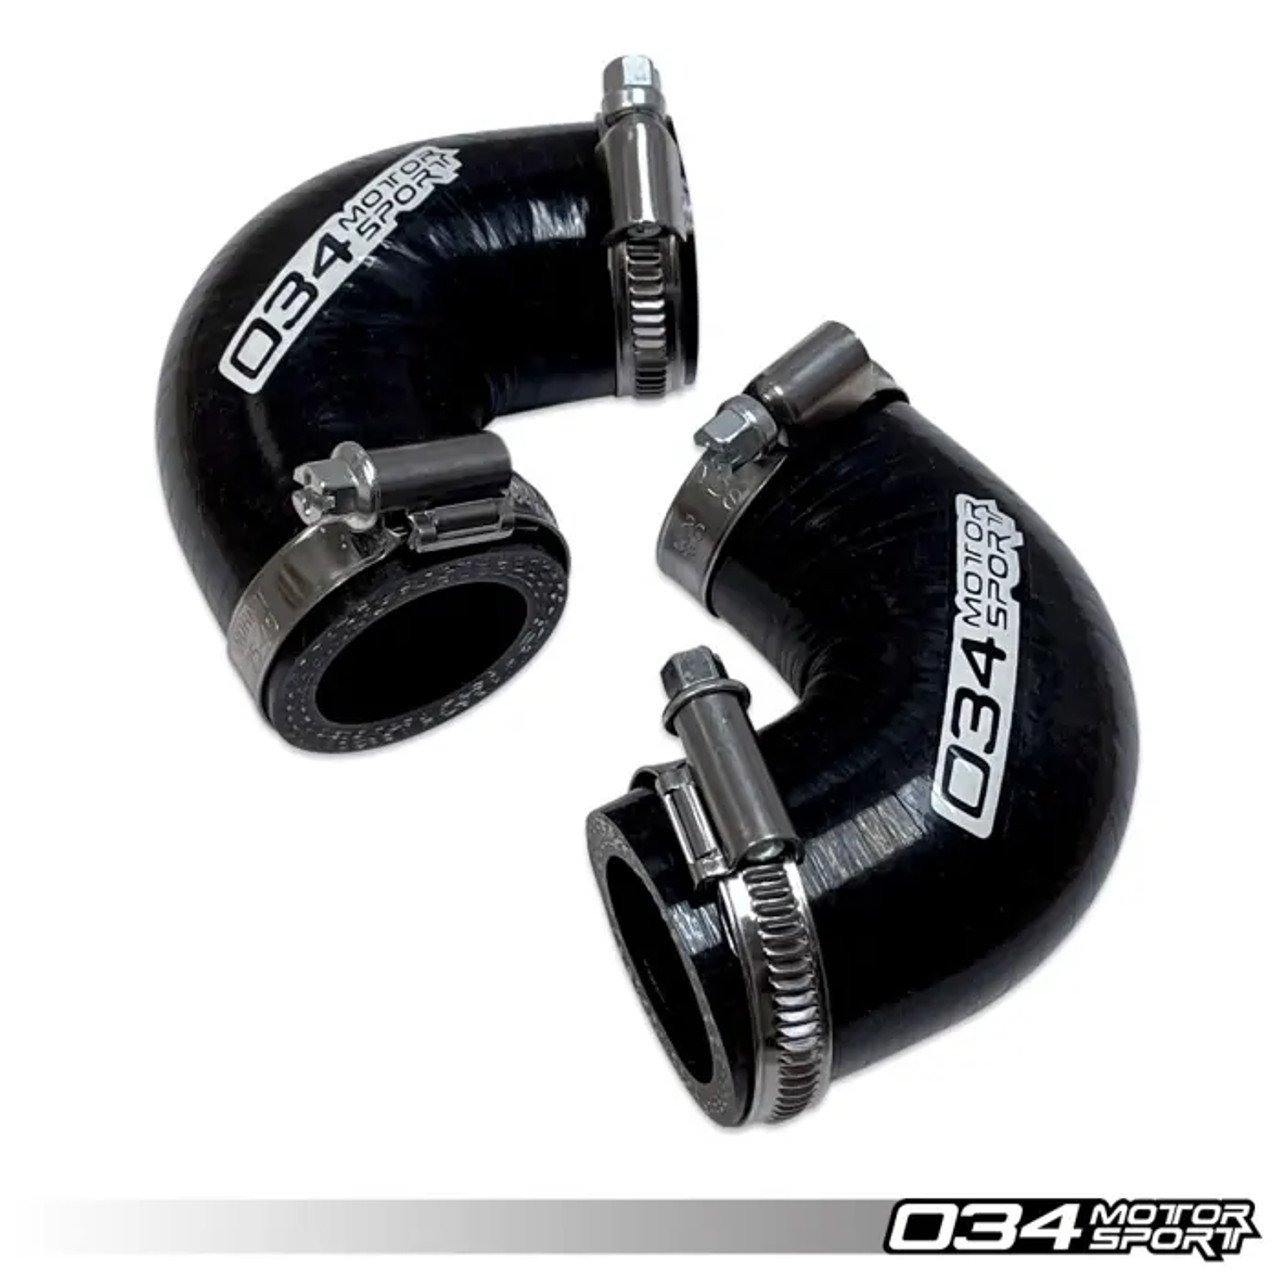 034Motorsport Silicone Bypass Valve Inlet Bipipe Hose Pair for APR Bipipe for B5 S4 & C5 A6 2.7T